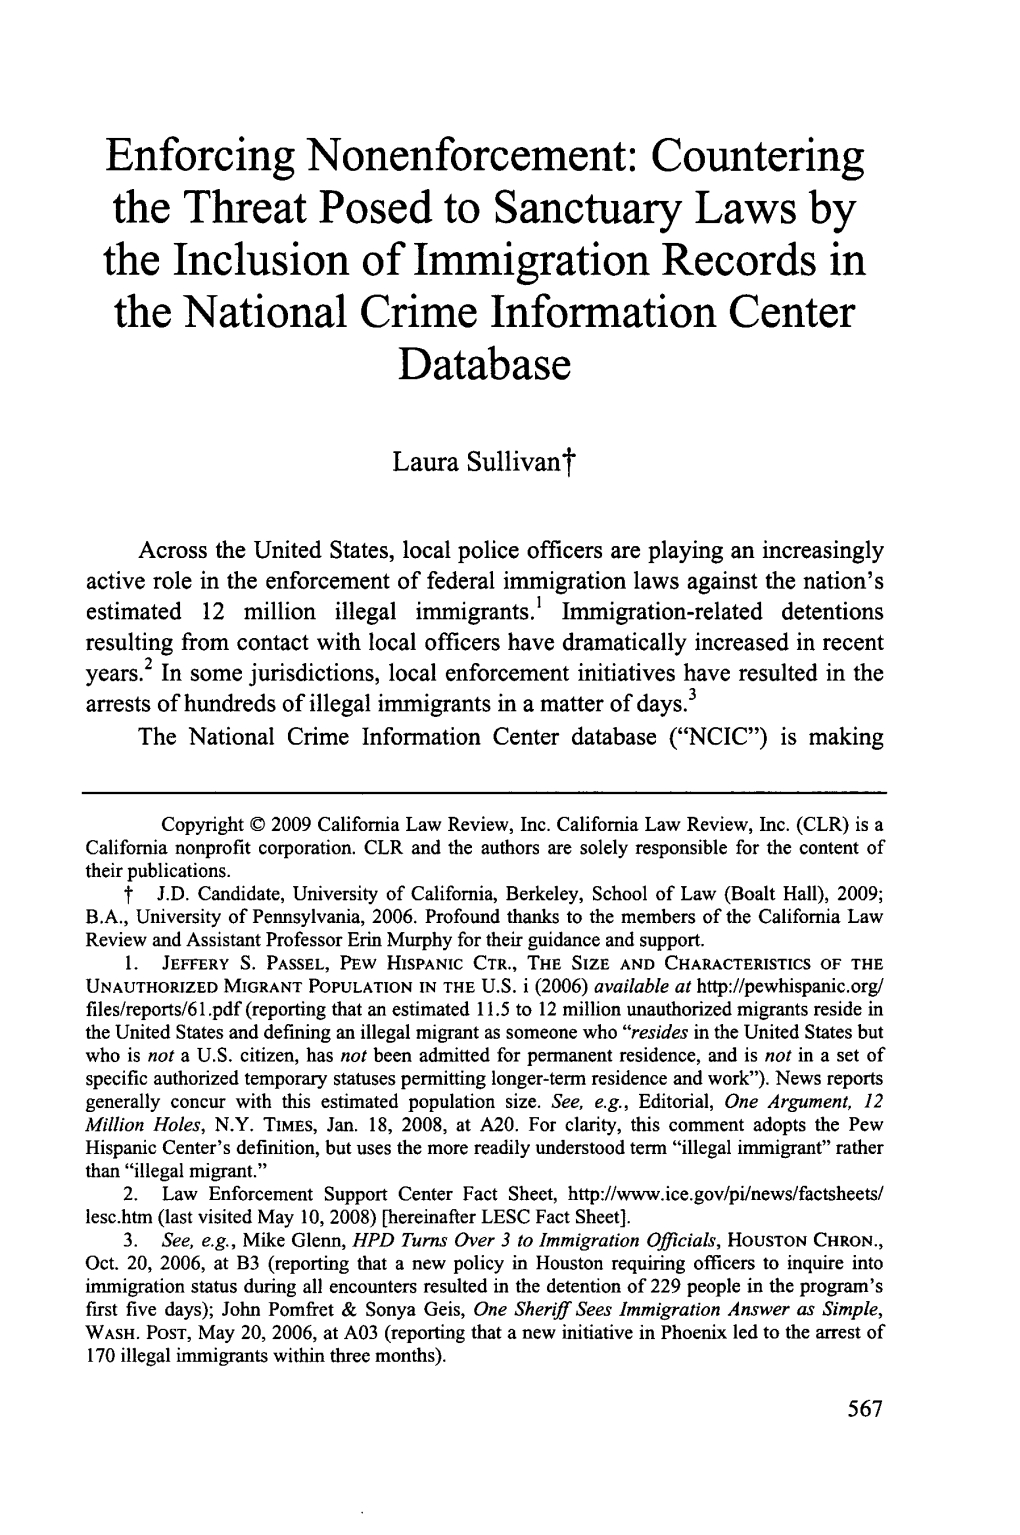 Enforcing Nonenforcement: Countering the Threat Posed to Sanctuary Laws by the Inclusion of Immigration Records in the National Crime Information Center Database